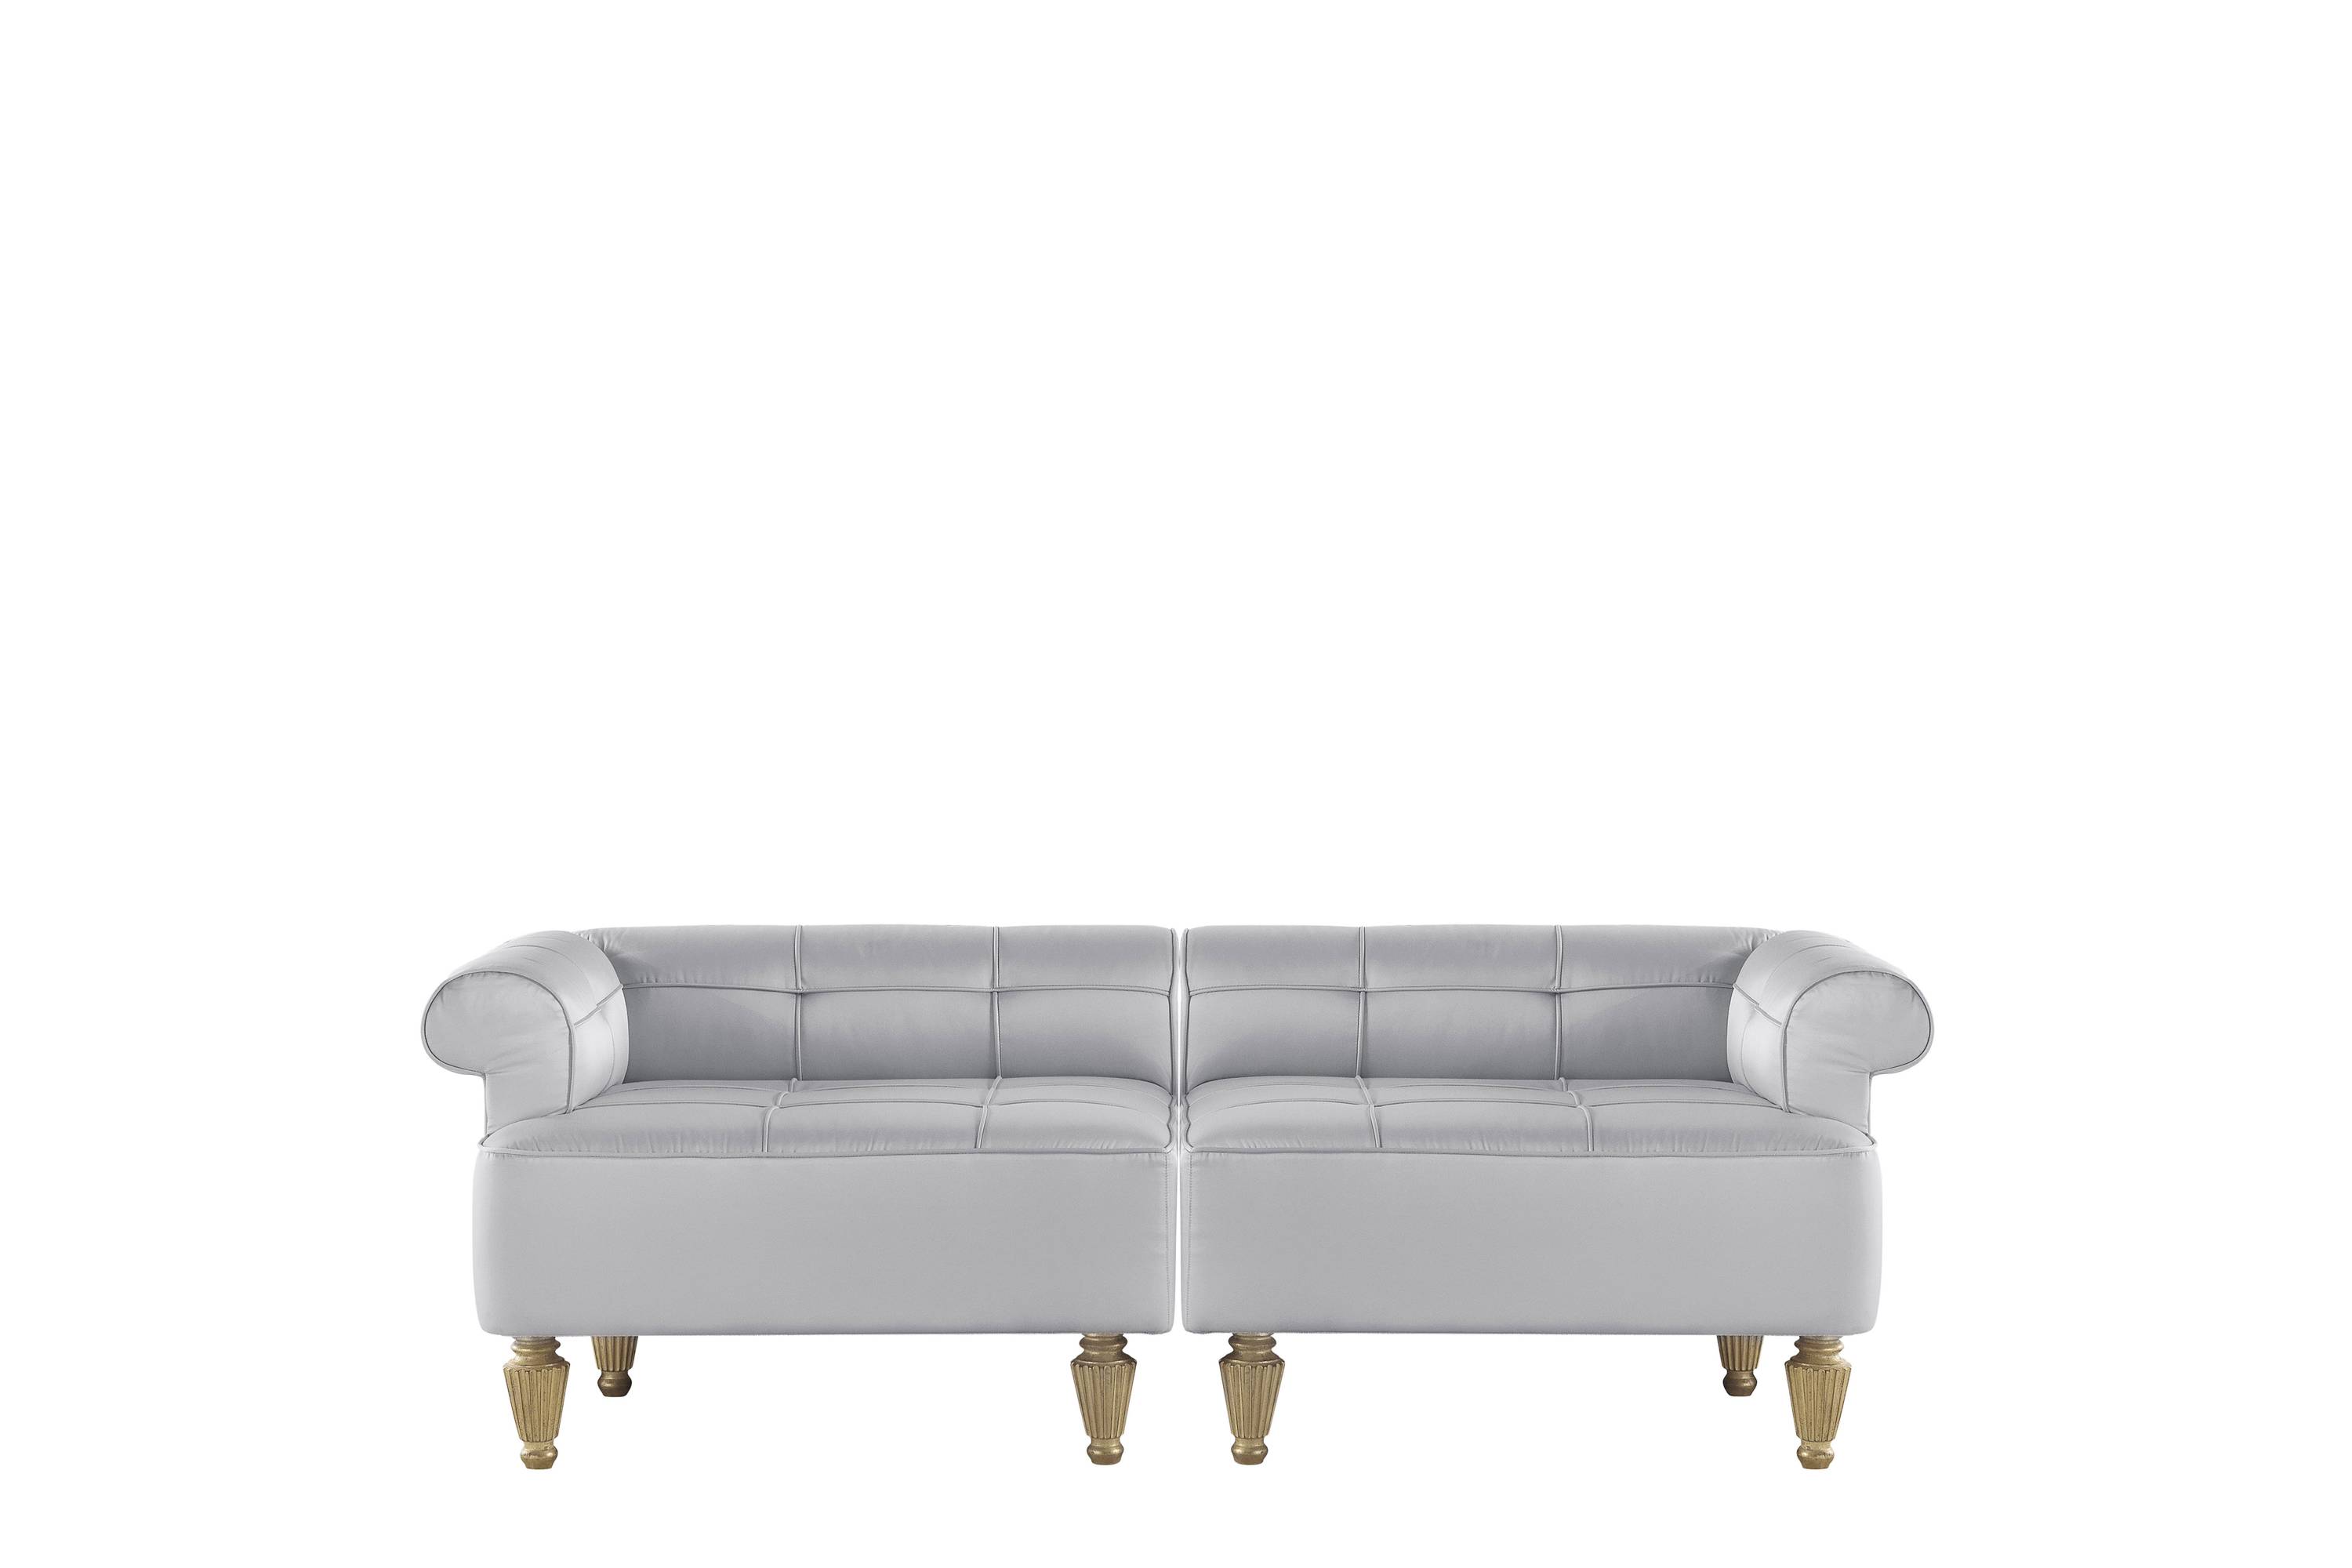 MUSA bench - convey elegance to each space with Italian classic poufs and benches of the classic Savoir-Faire collection